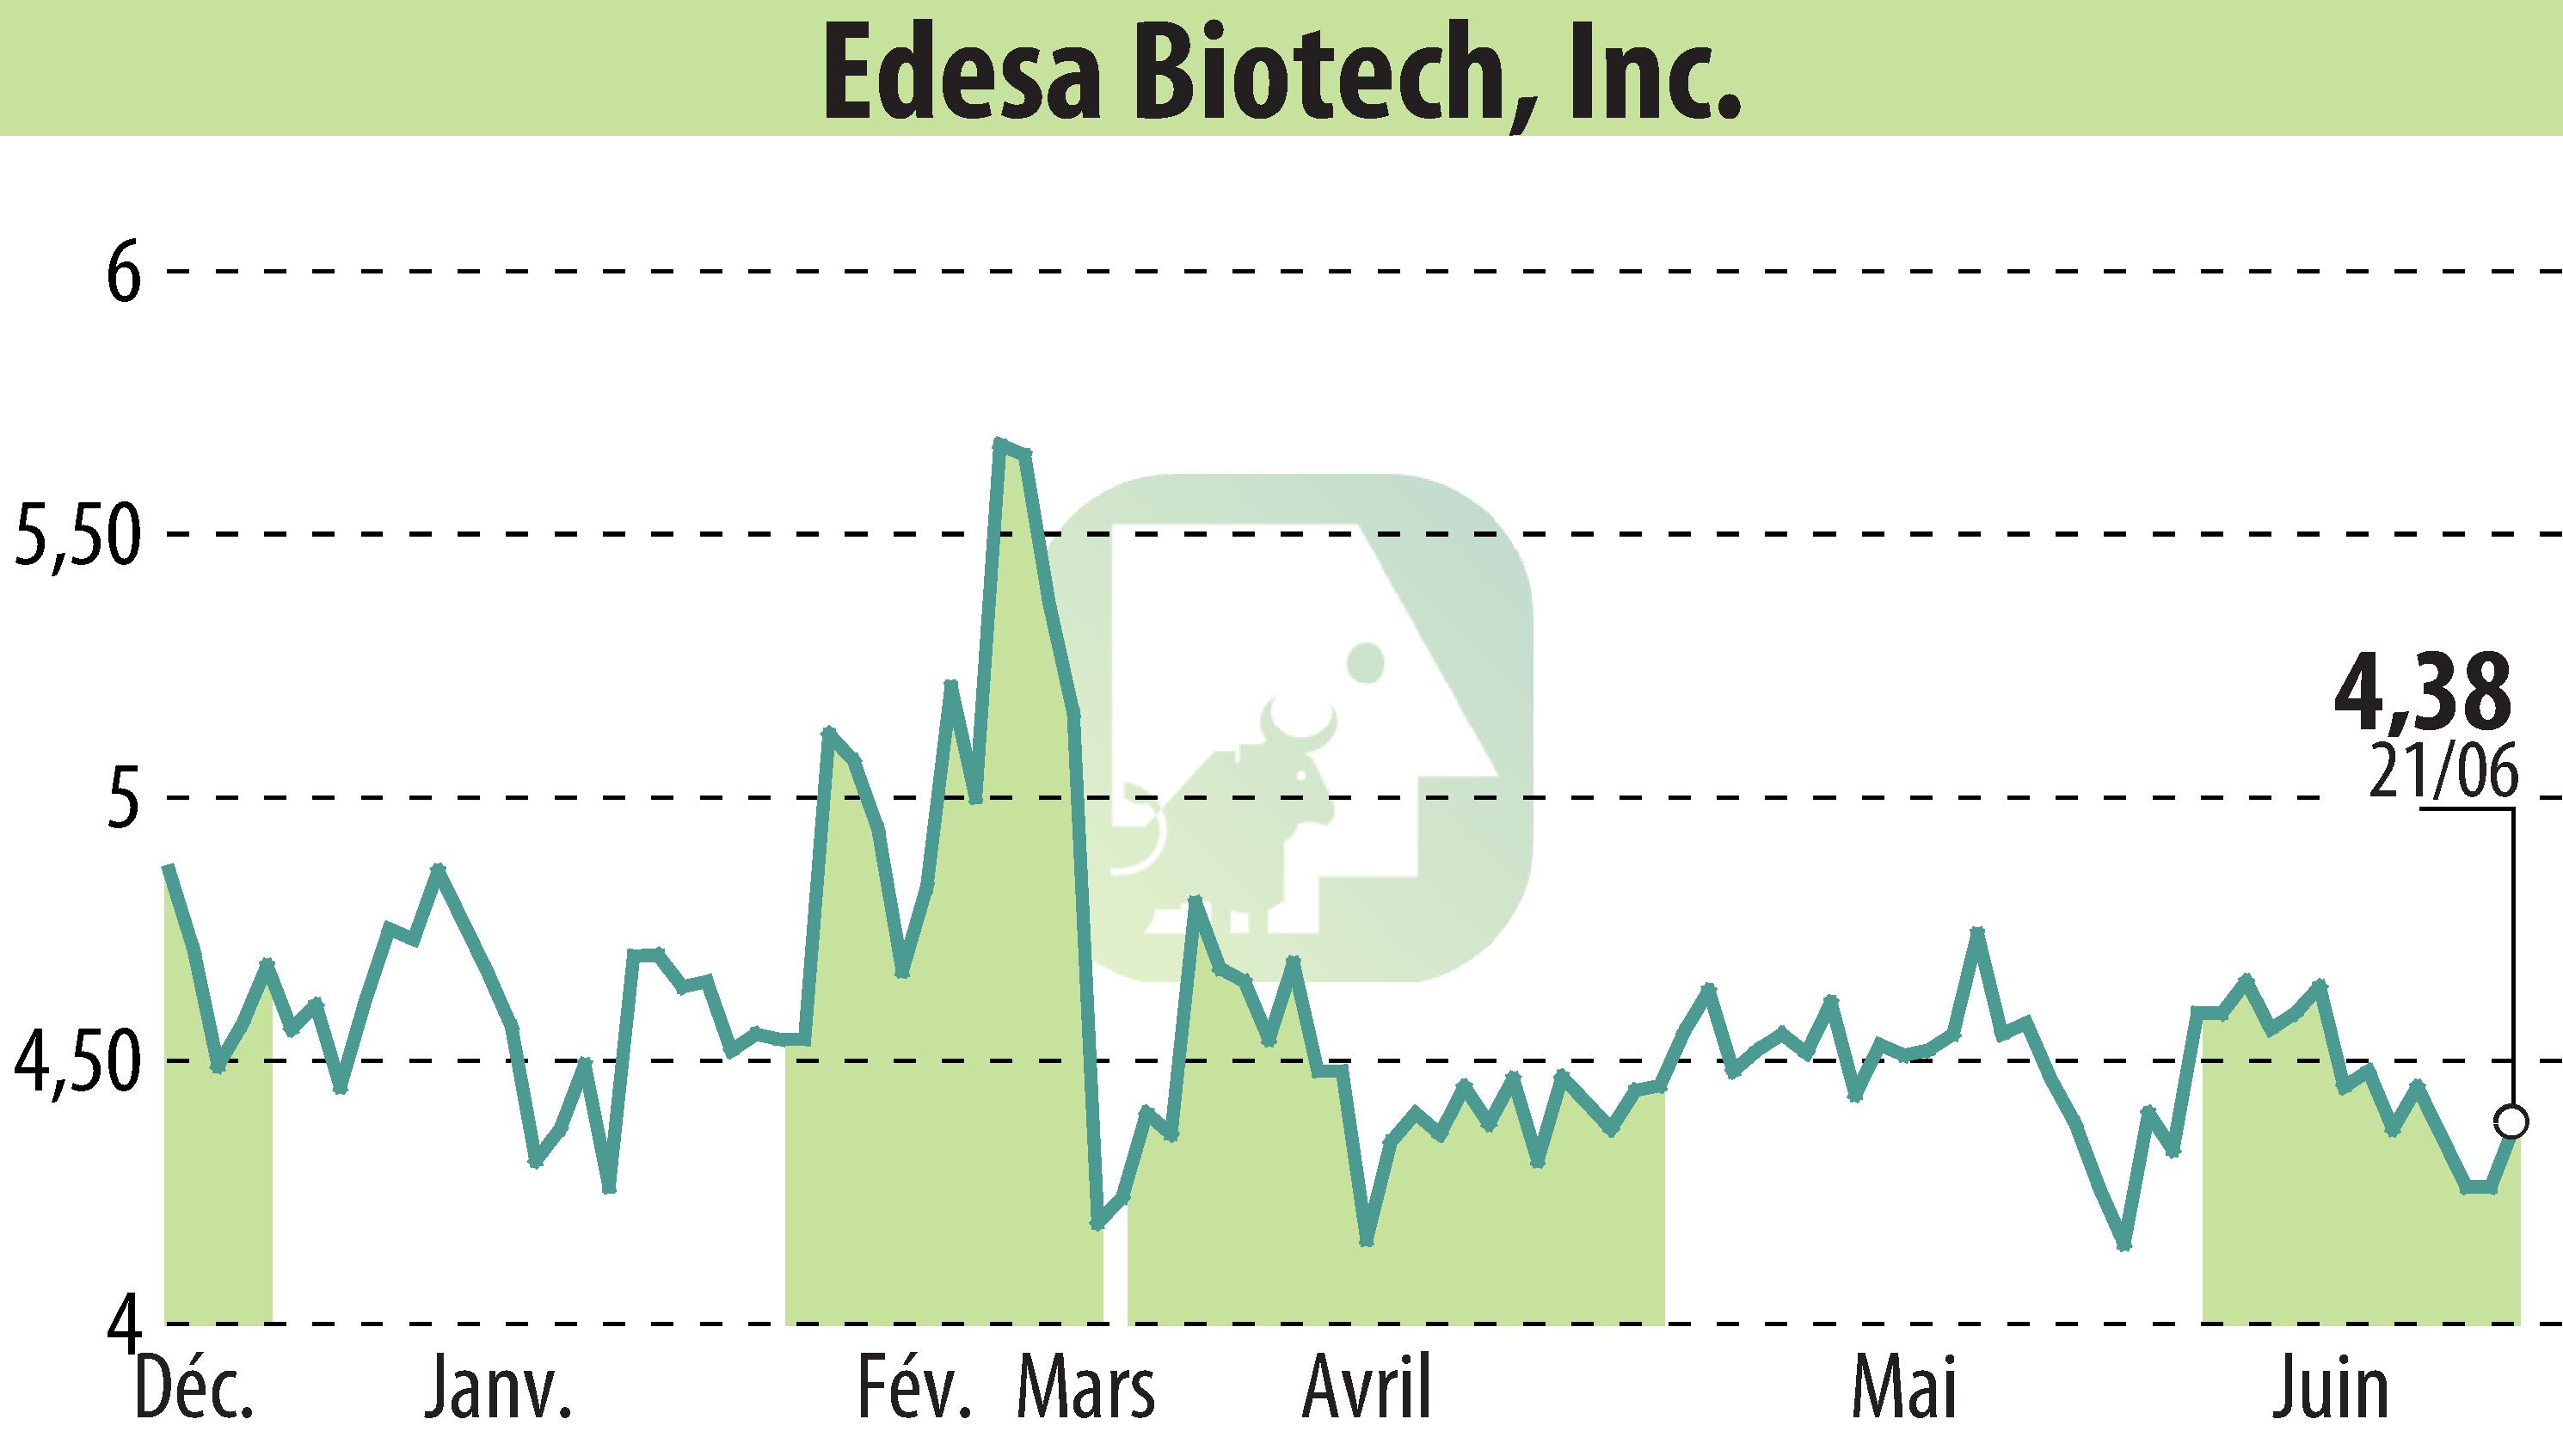 Stock price chart of Edesa Biotech (EBR:EDSA) showing fluctuations.